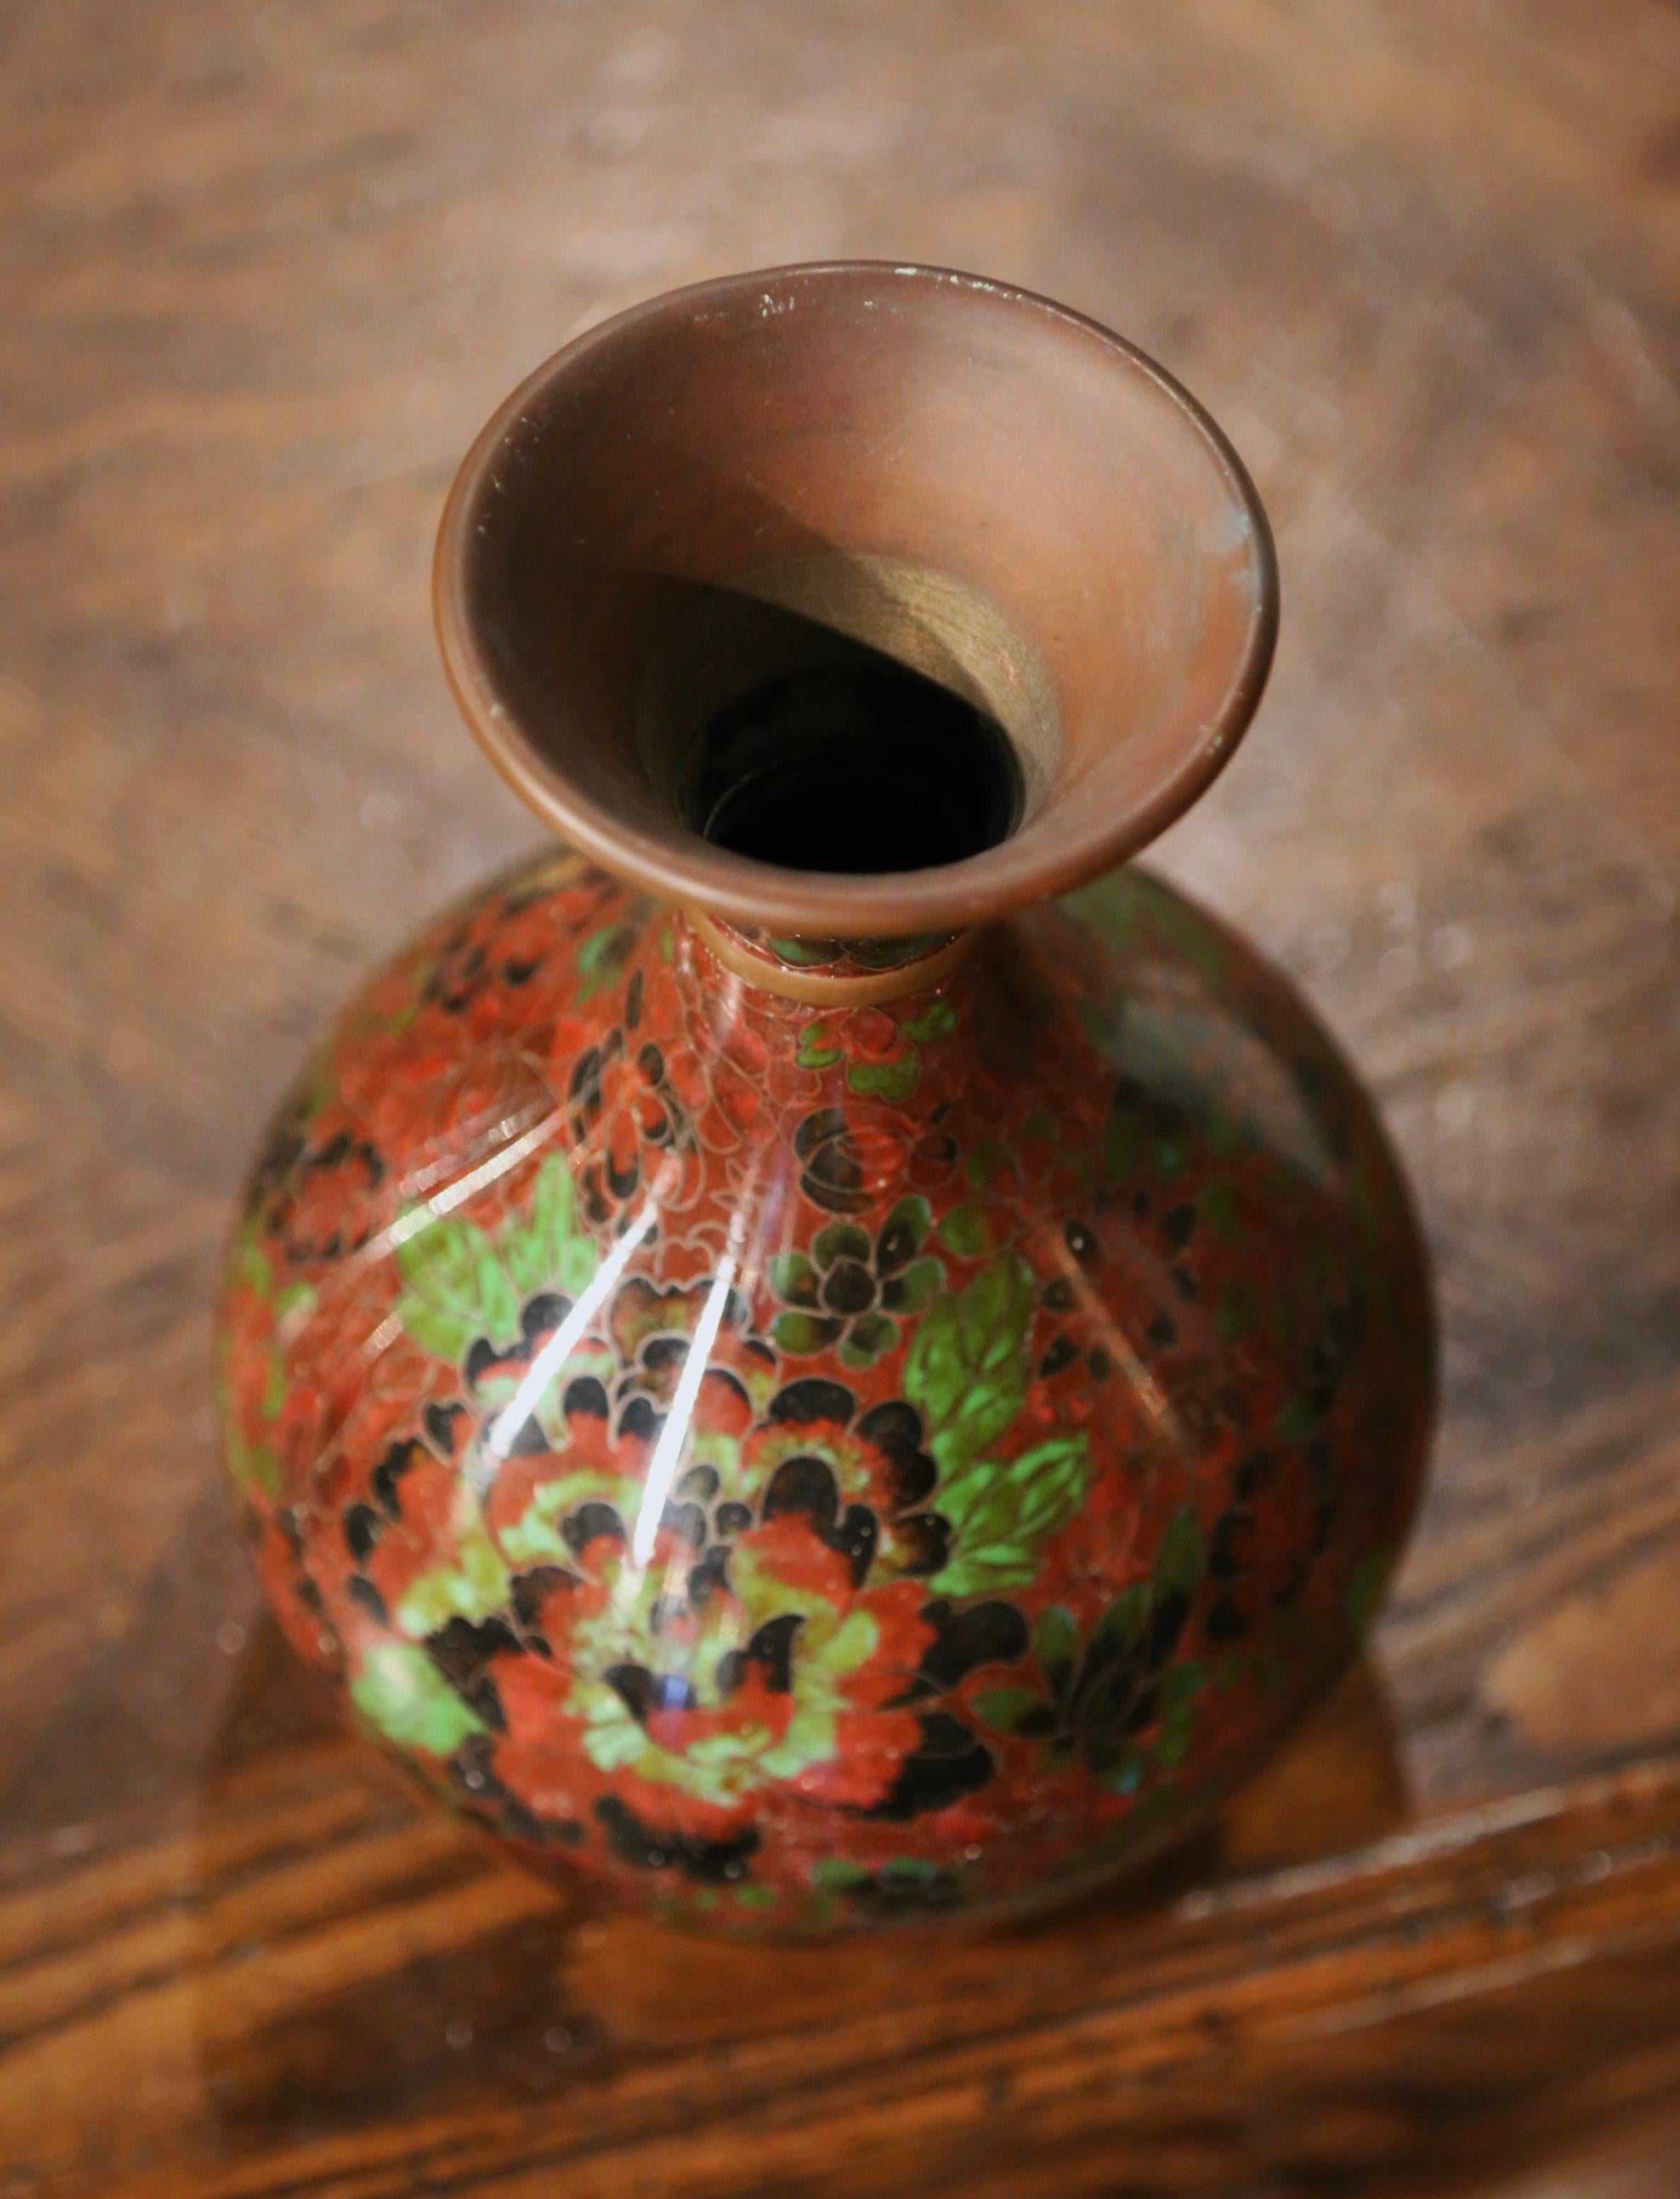 Decorate a table or a buffet with this colorful baluster vase. Created in China circa 1980, the vase sits on a carved ebonized wood stand and features floral motifs in the cloisonné technique (decorative work in which enamel, glass, or gemstones are